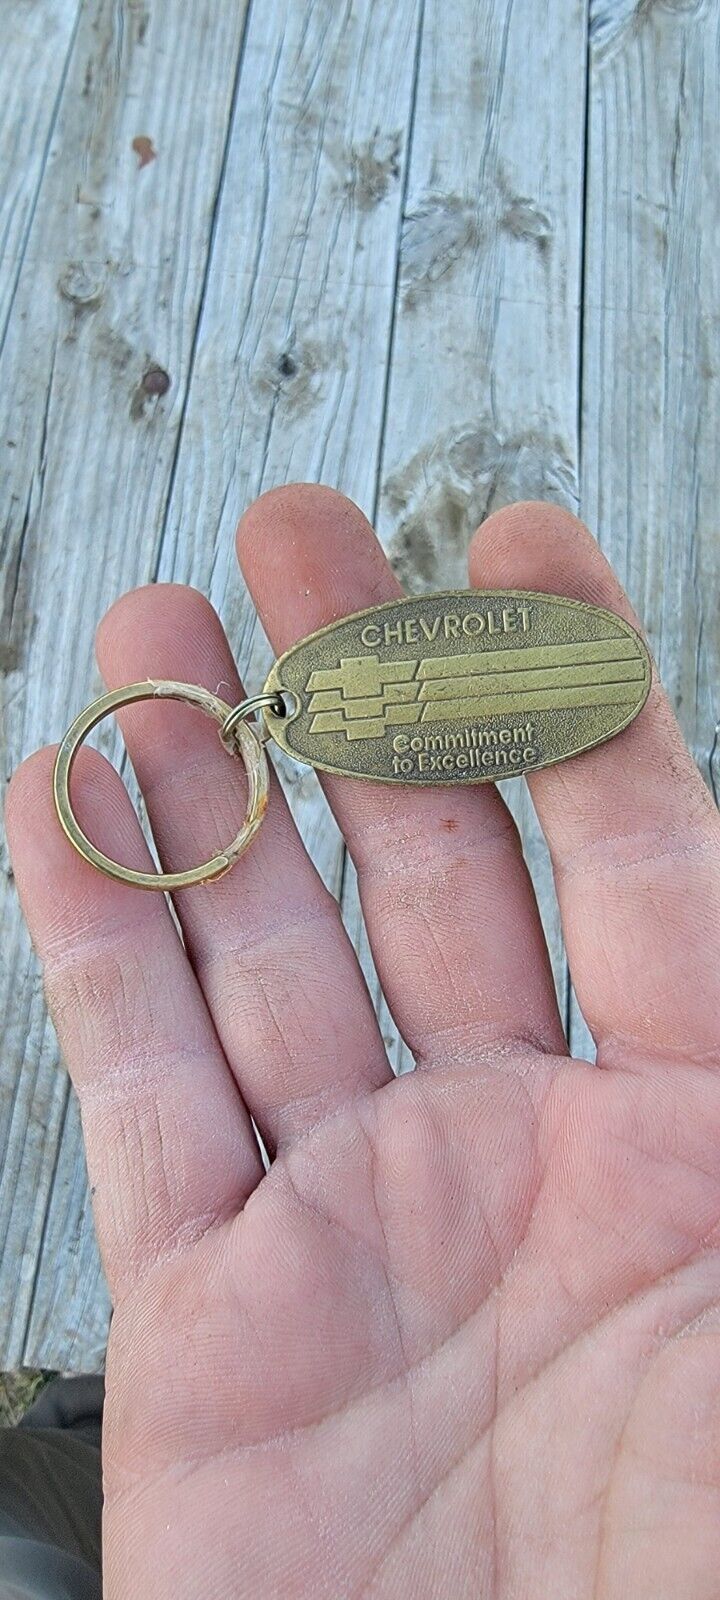 VINTAGE BRASS CHEVROLET COMMITMENT TO EXCELLENCE” RETURN POSTAGE KEY CHAIN  